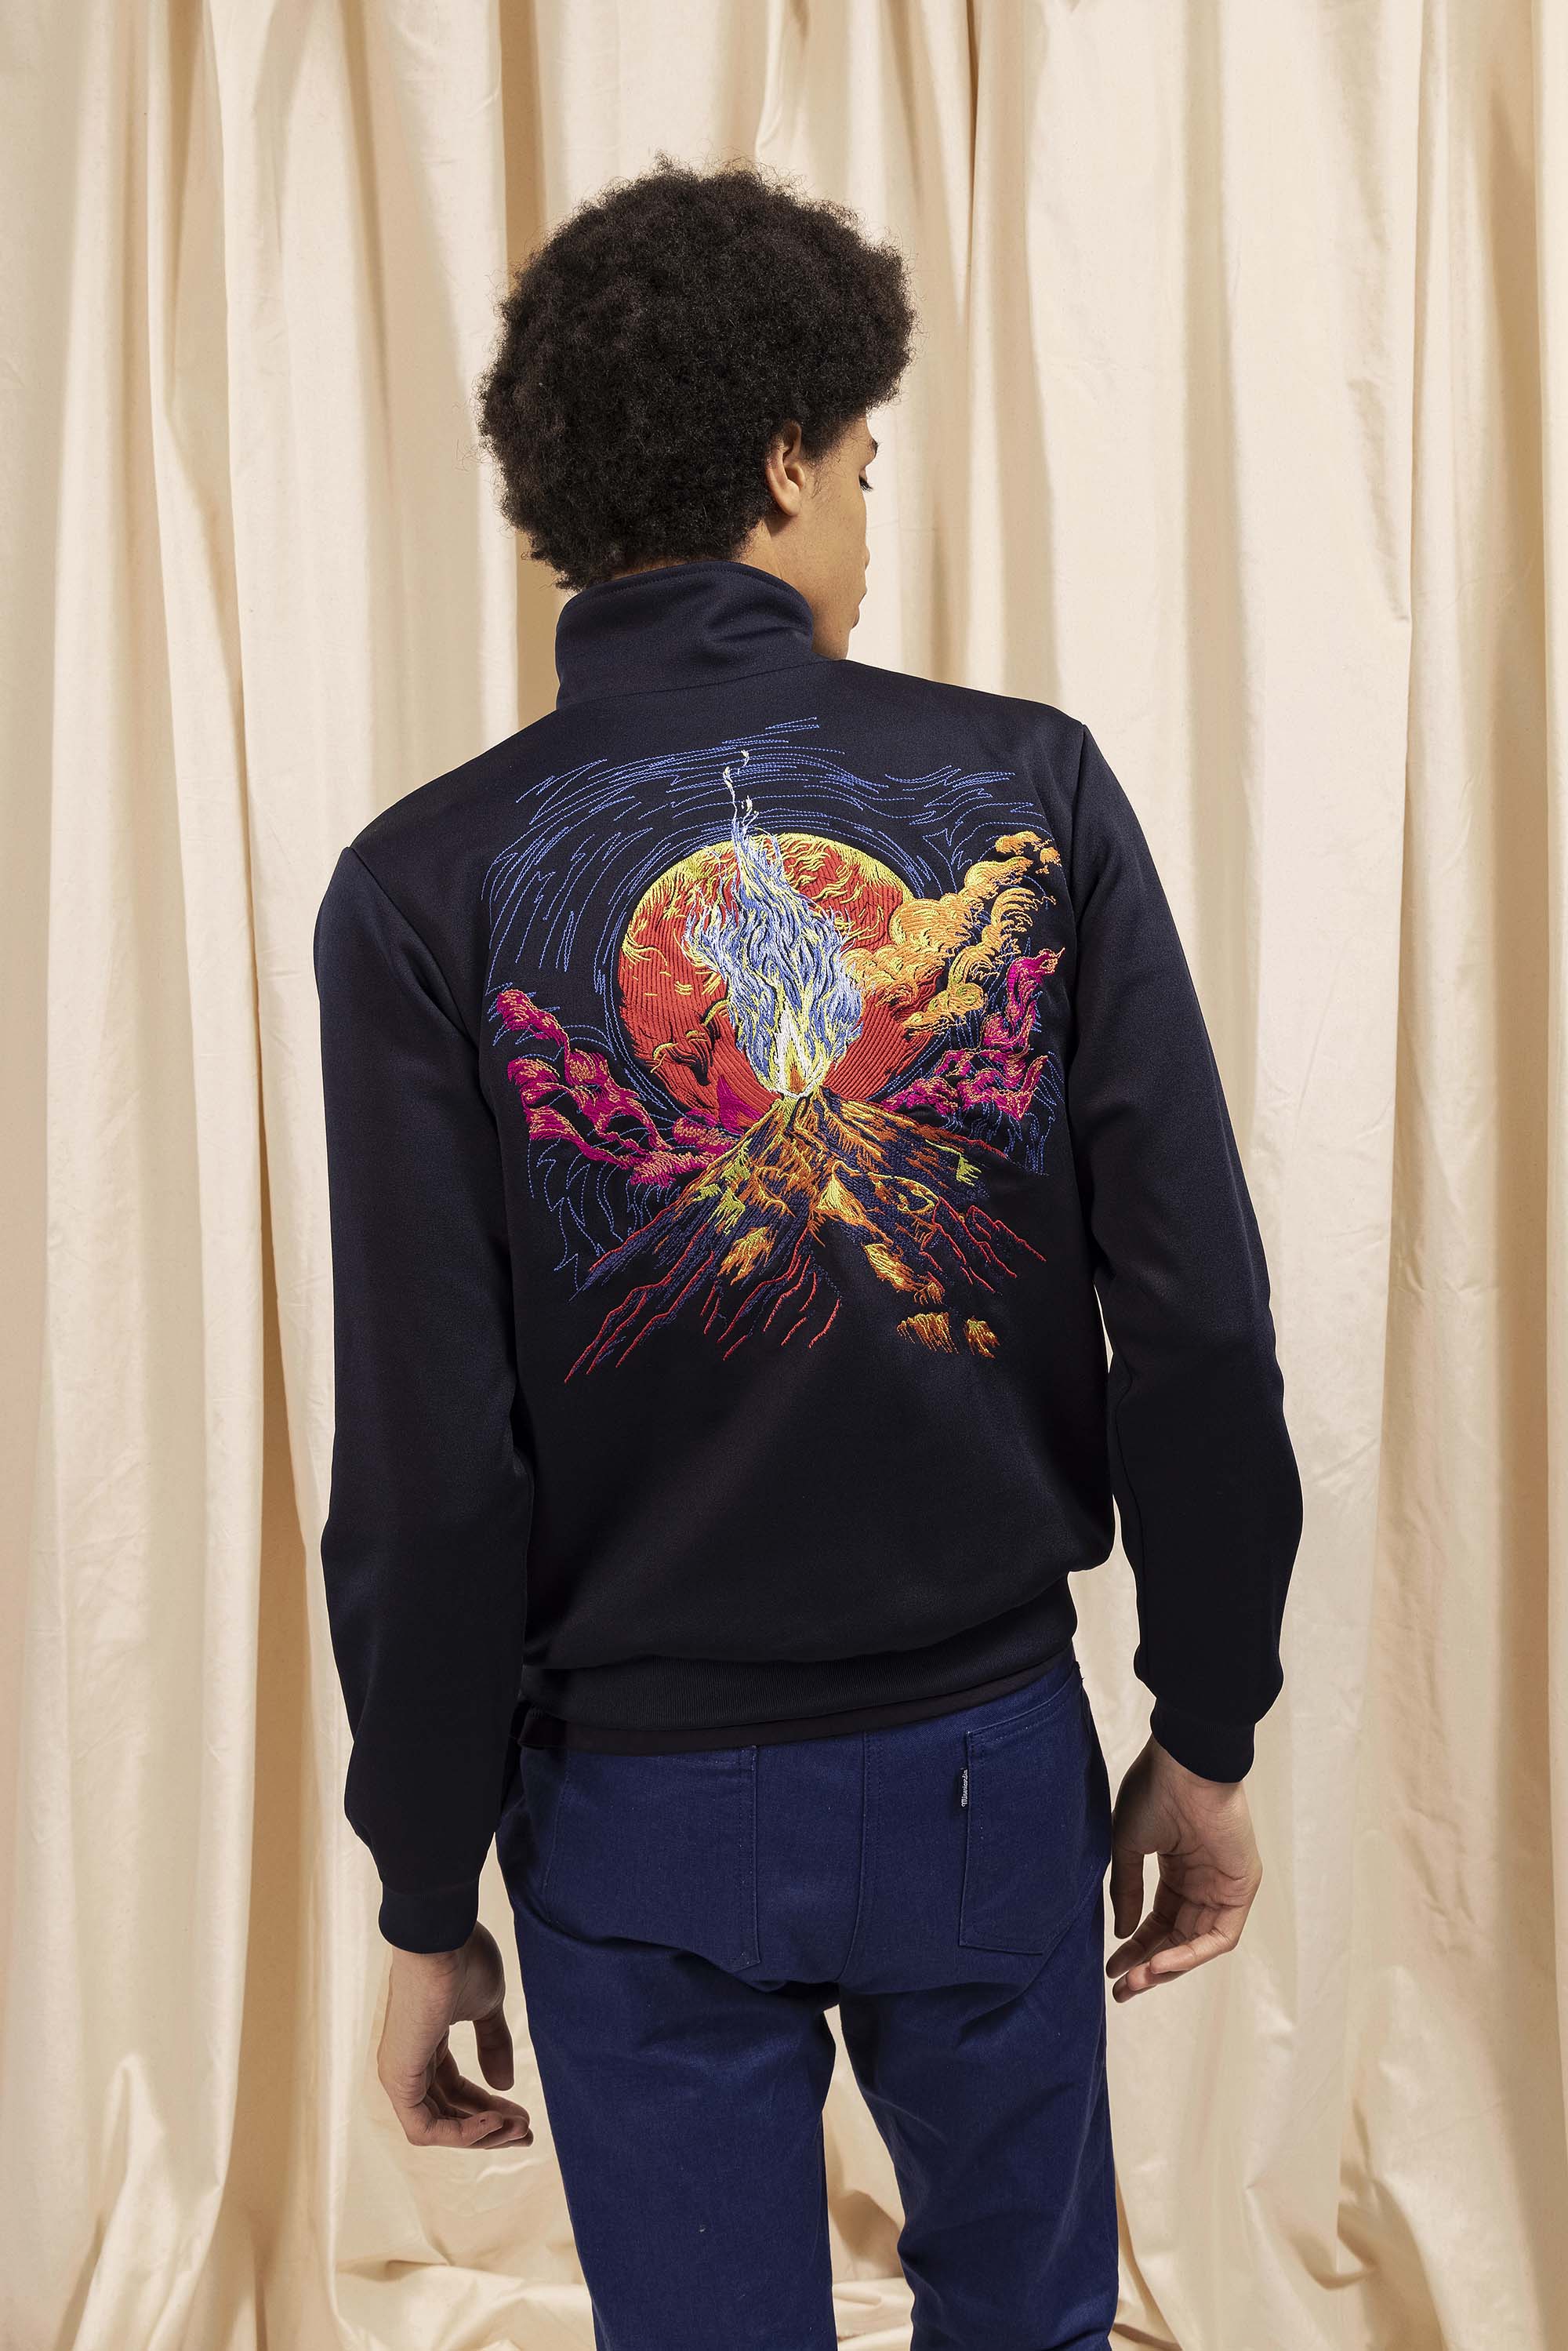 Navy blue sports jacket in cotton and polyester with volcano embroidery on the back, two side pockets and zip closure